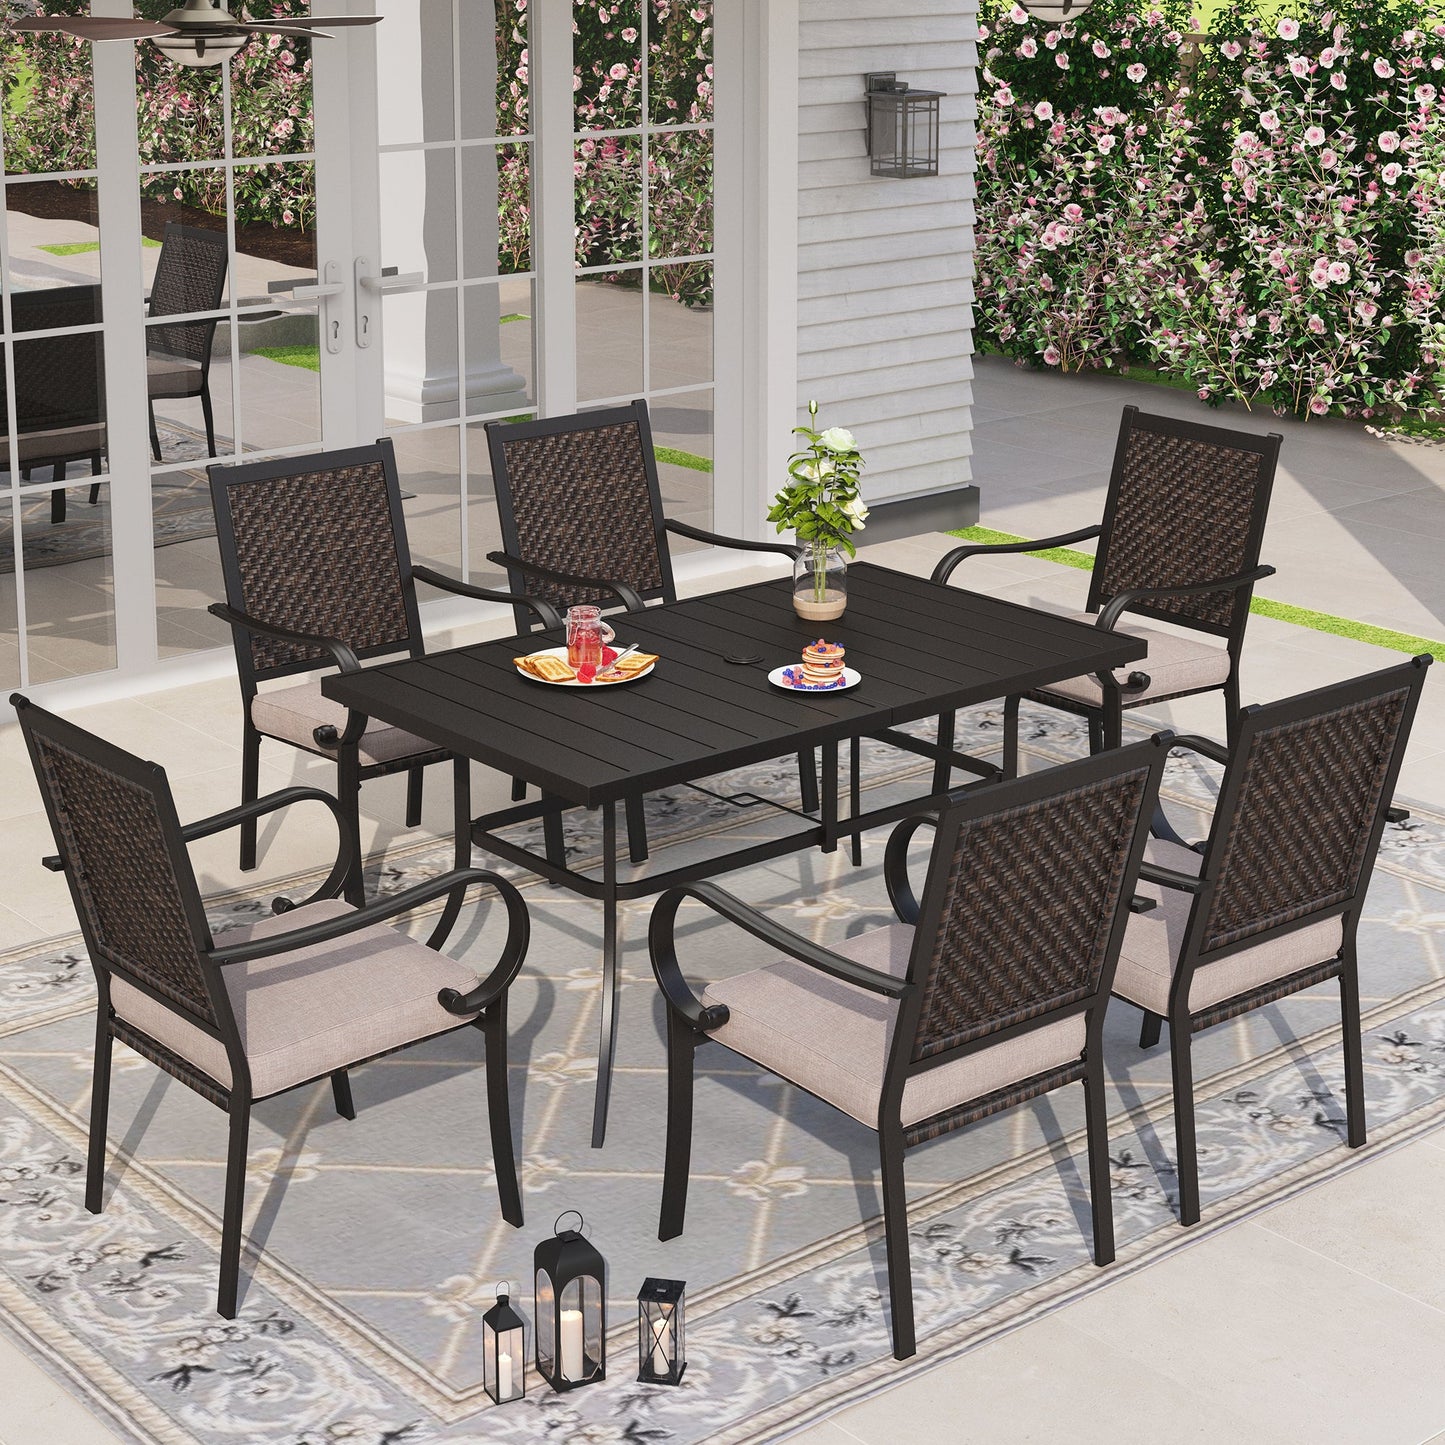 Sophia & William 7 Pieces Outdoor Patio Dining Set Wicker Rattan Chairs and Rectangular Steel Table for 6-person